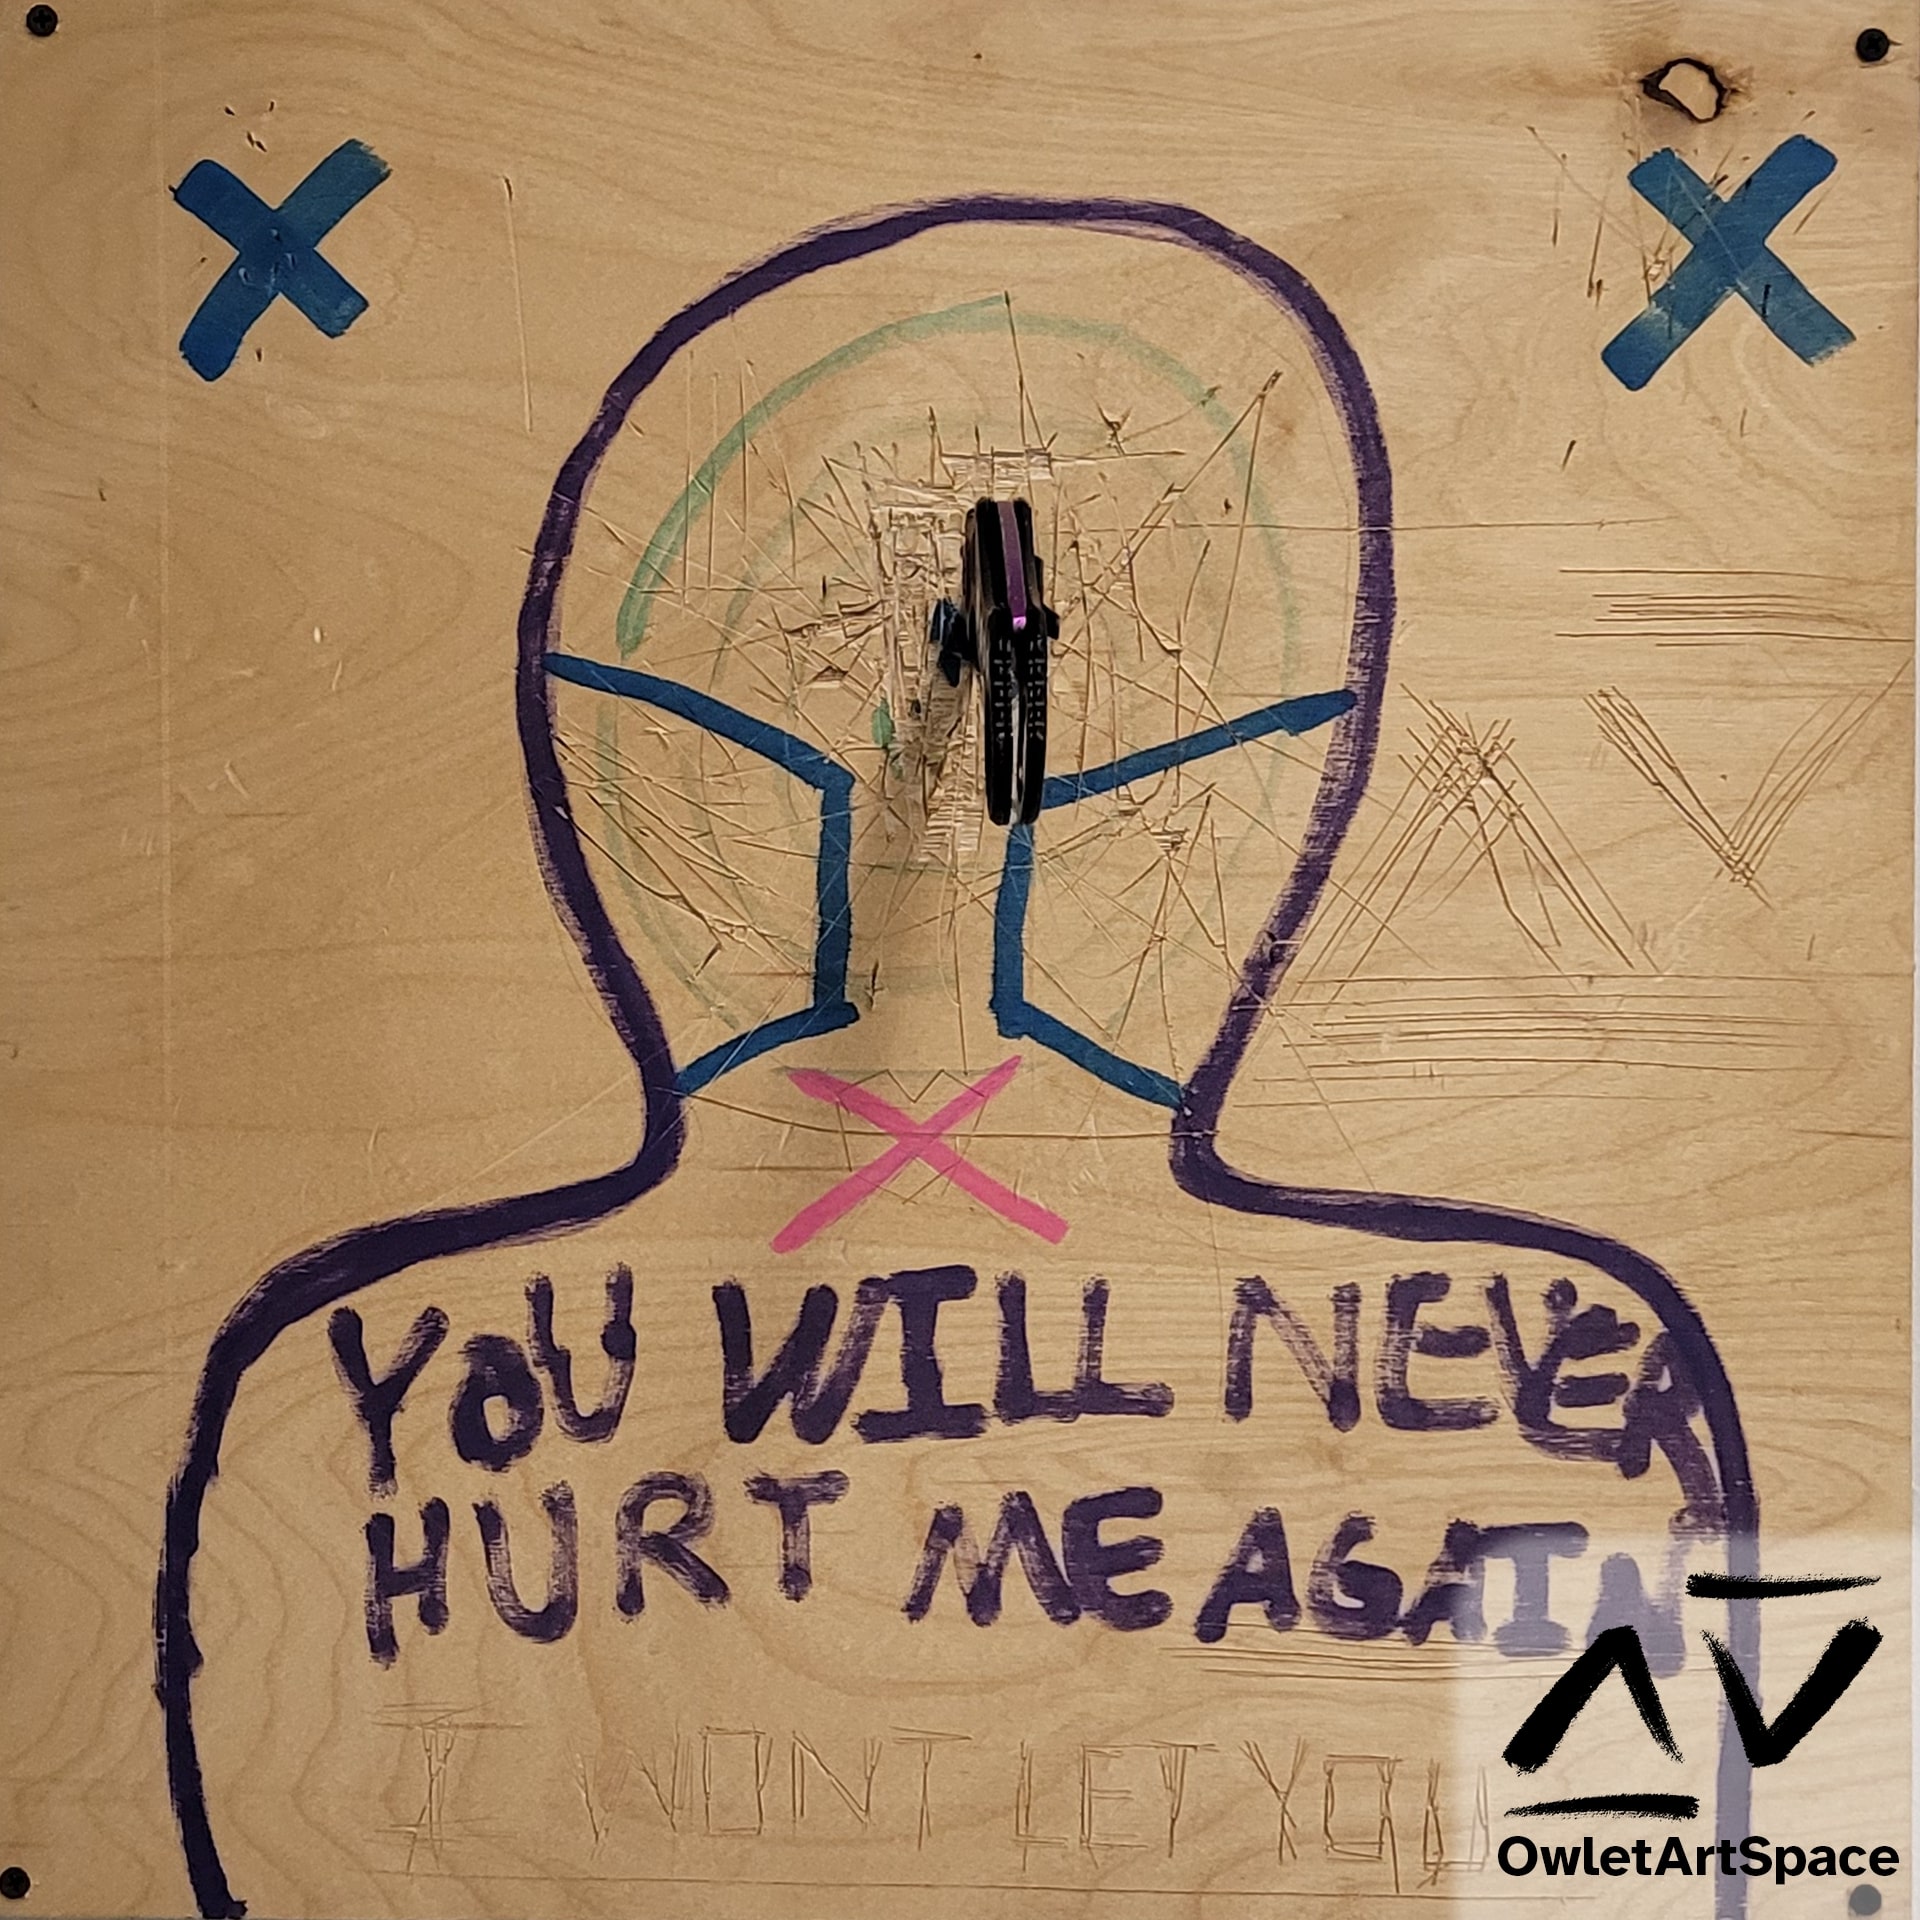 A wooden board with a silhouette with different target areas on it. The shoulder area reads "YOU WILL NEVER HURT ME AGAIN". Underneath that carved into the wood is "I WONT LET YOU" Along the main body are hundreds of knife slashes and nicks from throwing knives on two X-shaped spots above the silhouette on the left and right side. In the center of the head is a karambit sticking out of the wood.